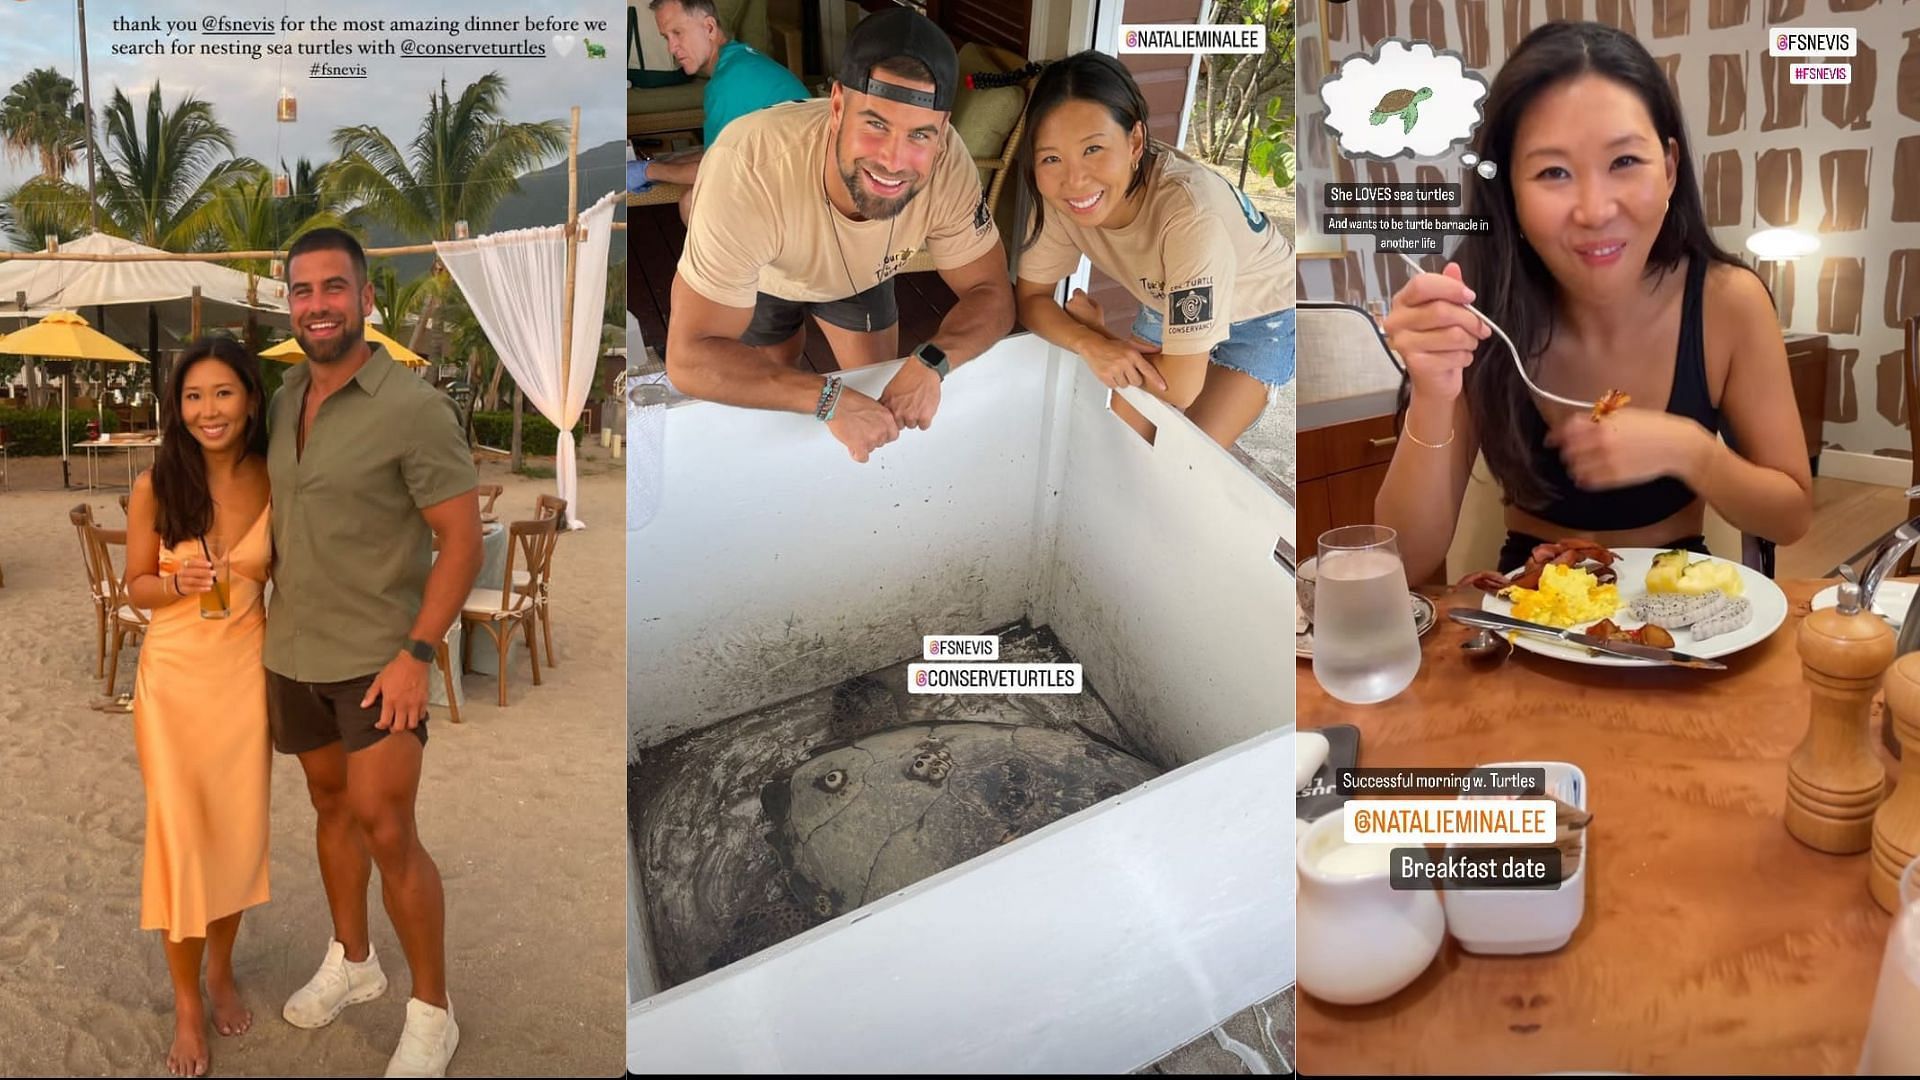 Pictures shared by Lee and Moynes from their trip. (Image via @ natalieminalee and blakemoynesption/Instagram story)